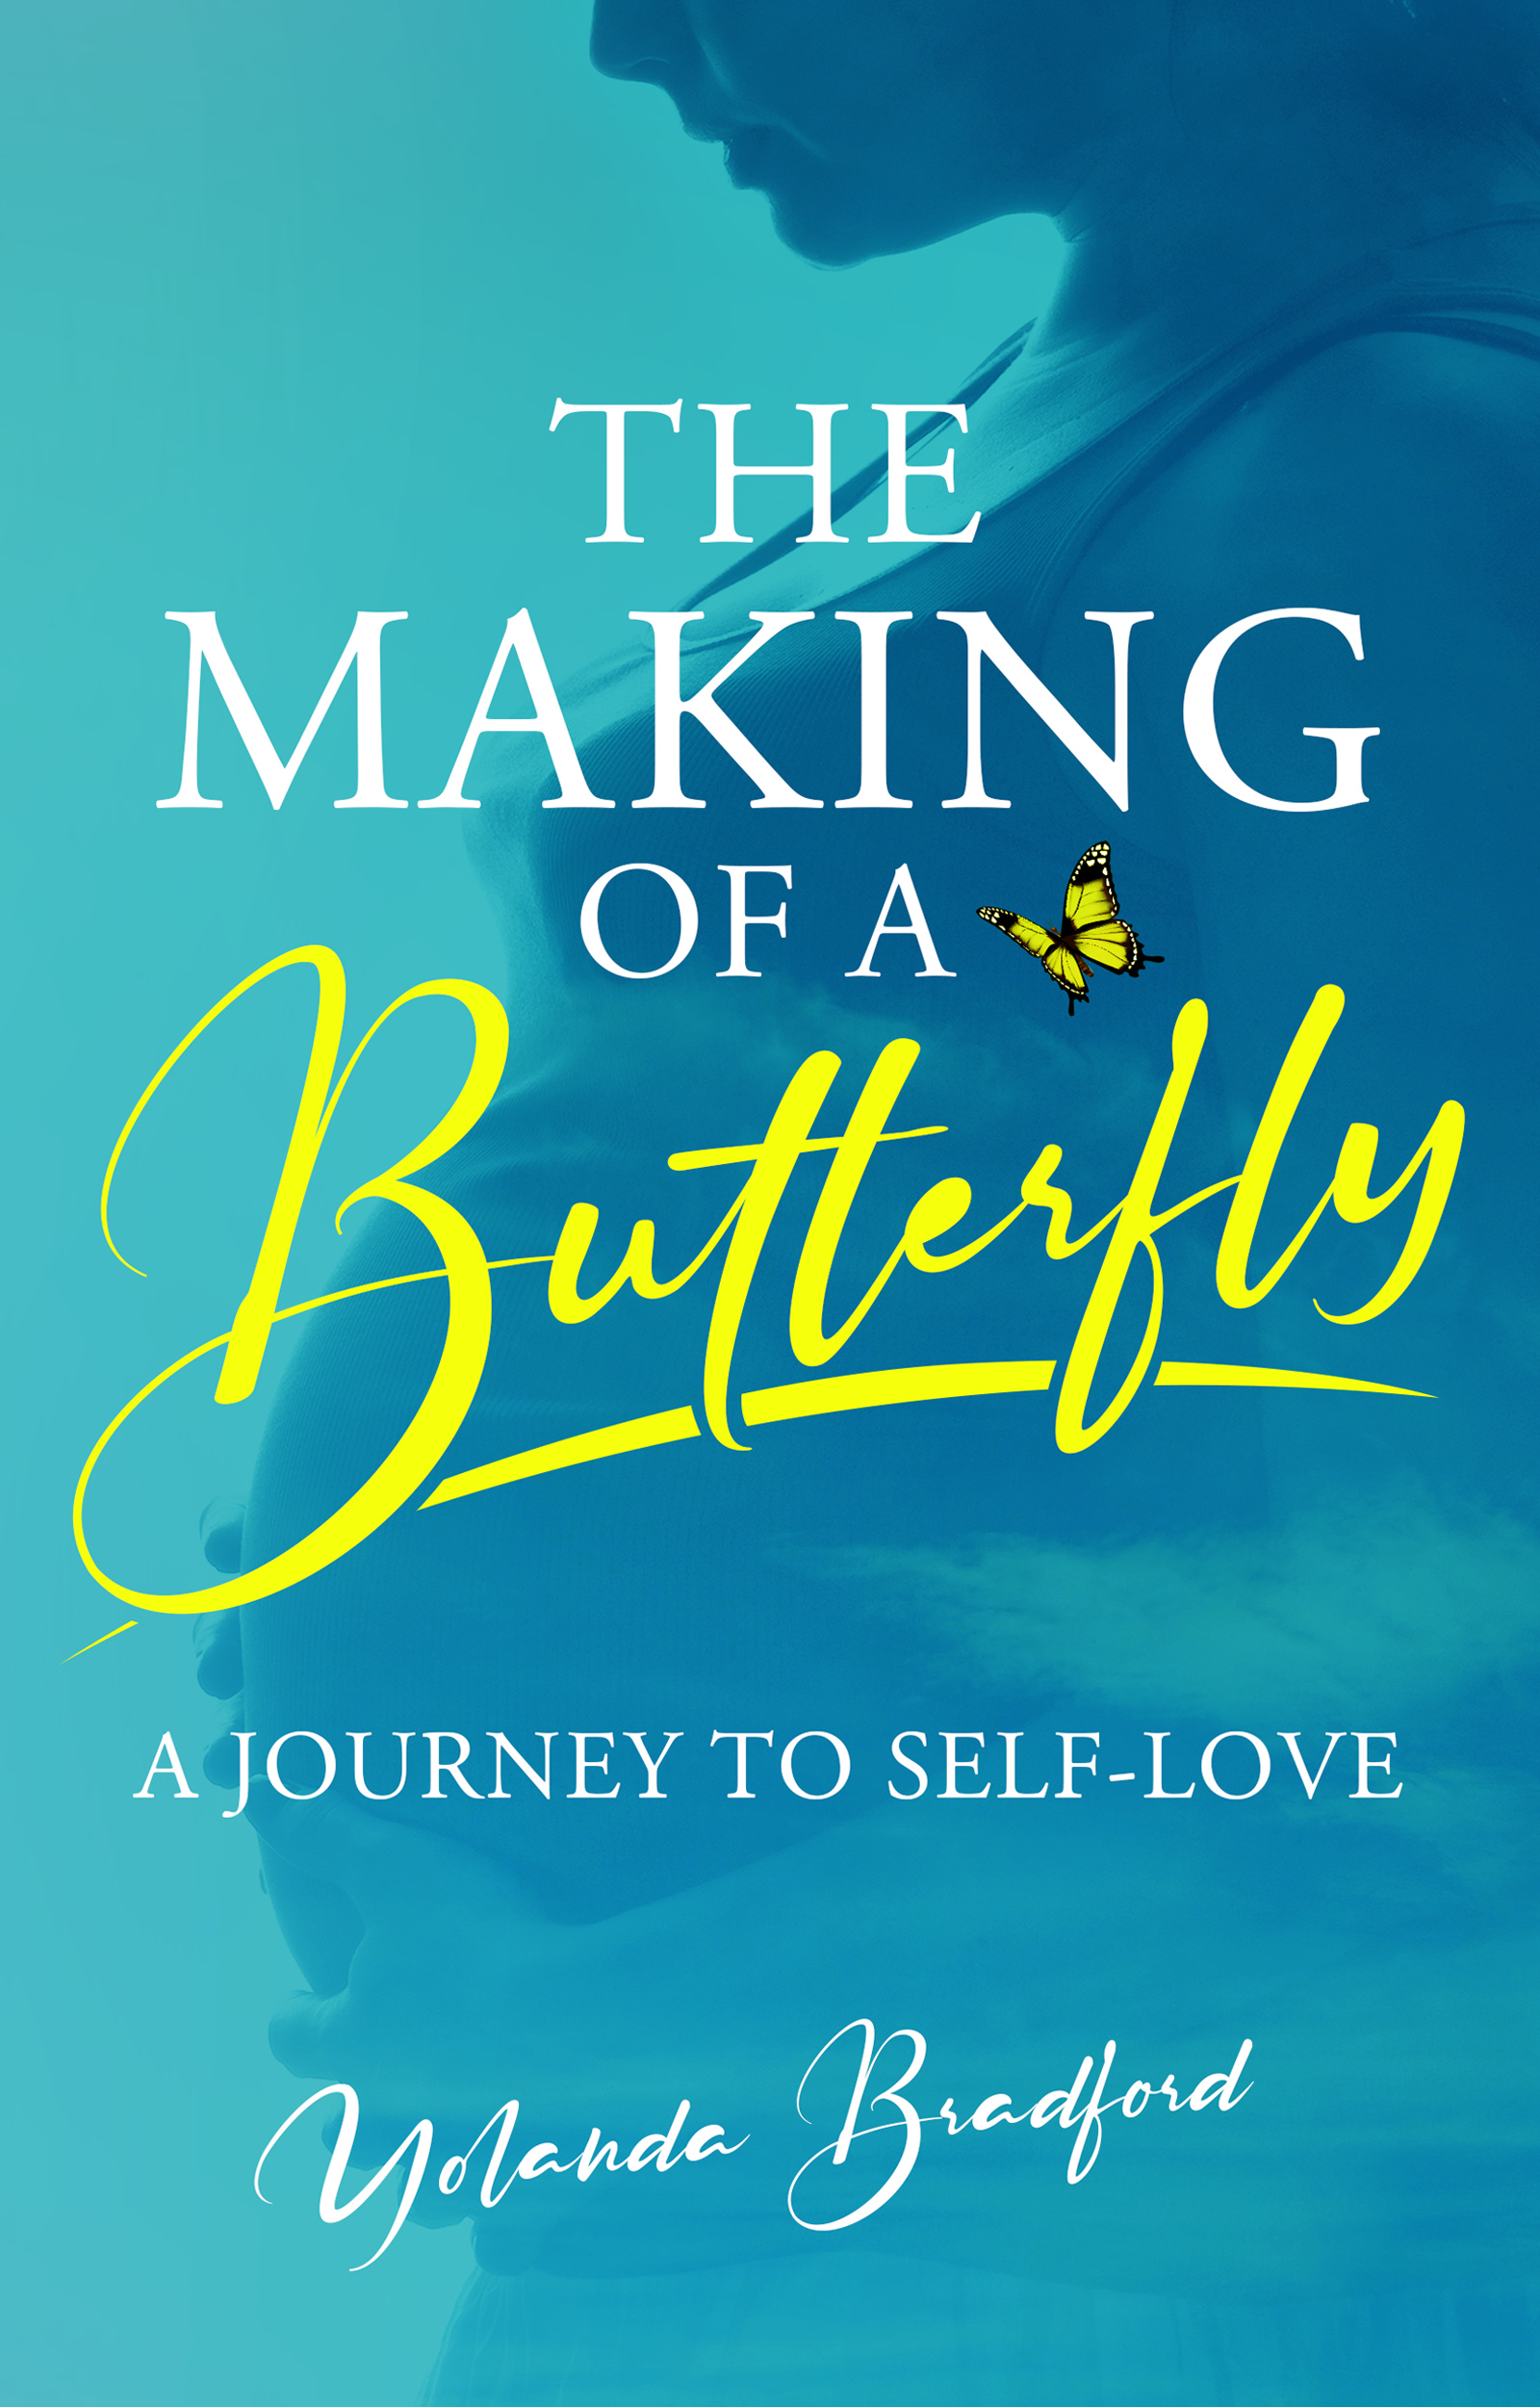 “The Making of a Butterfly”